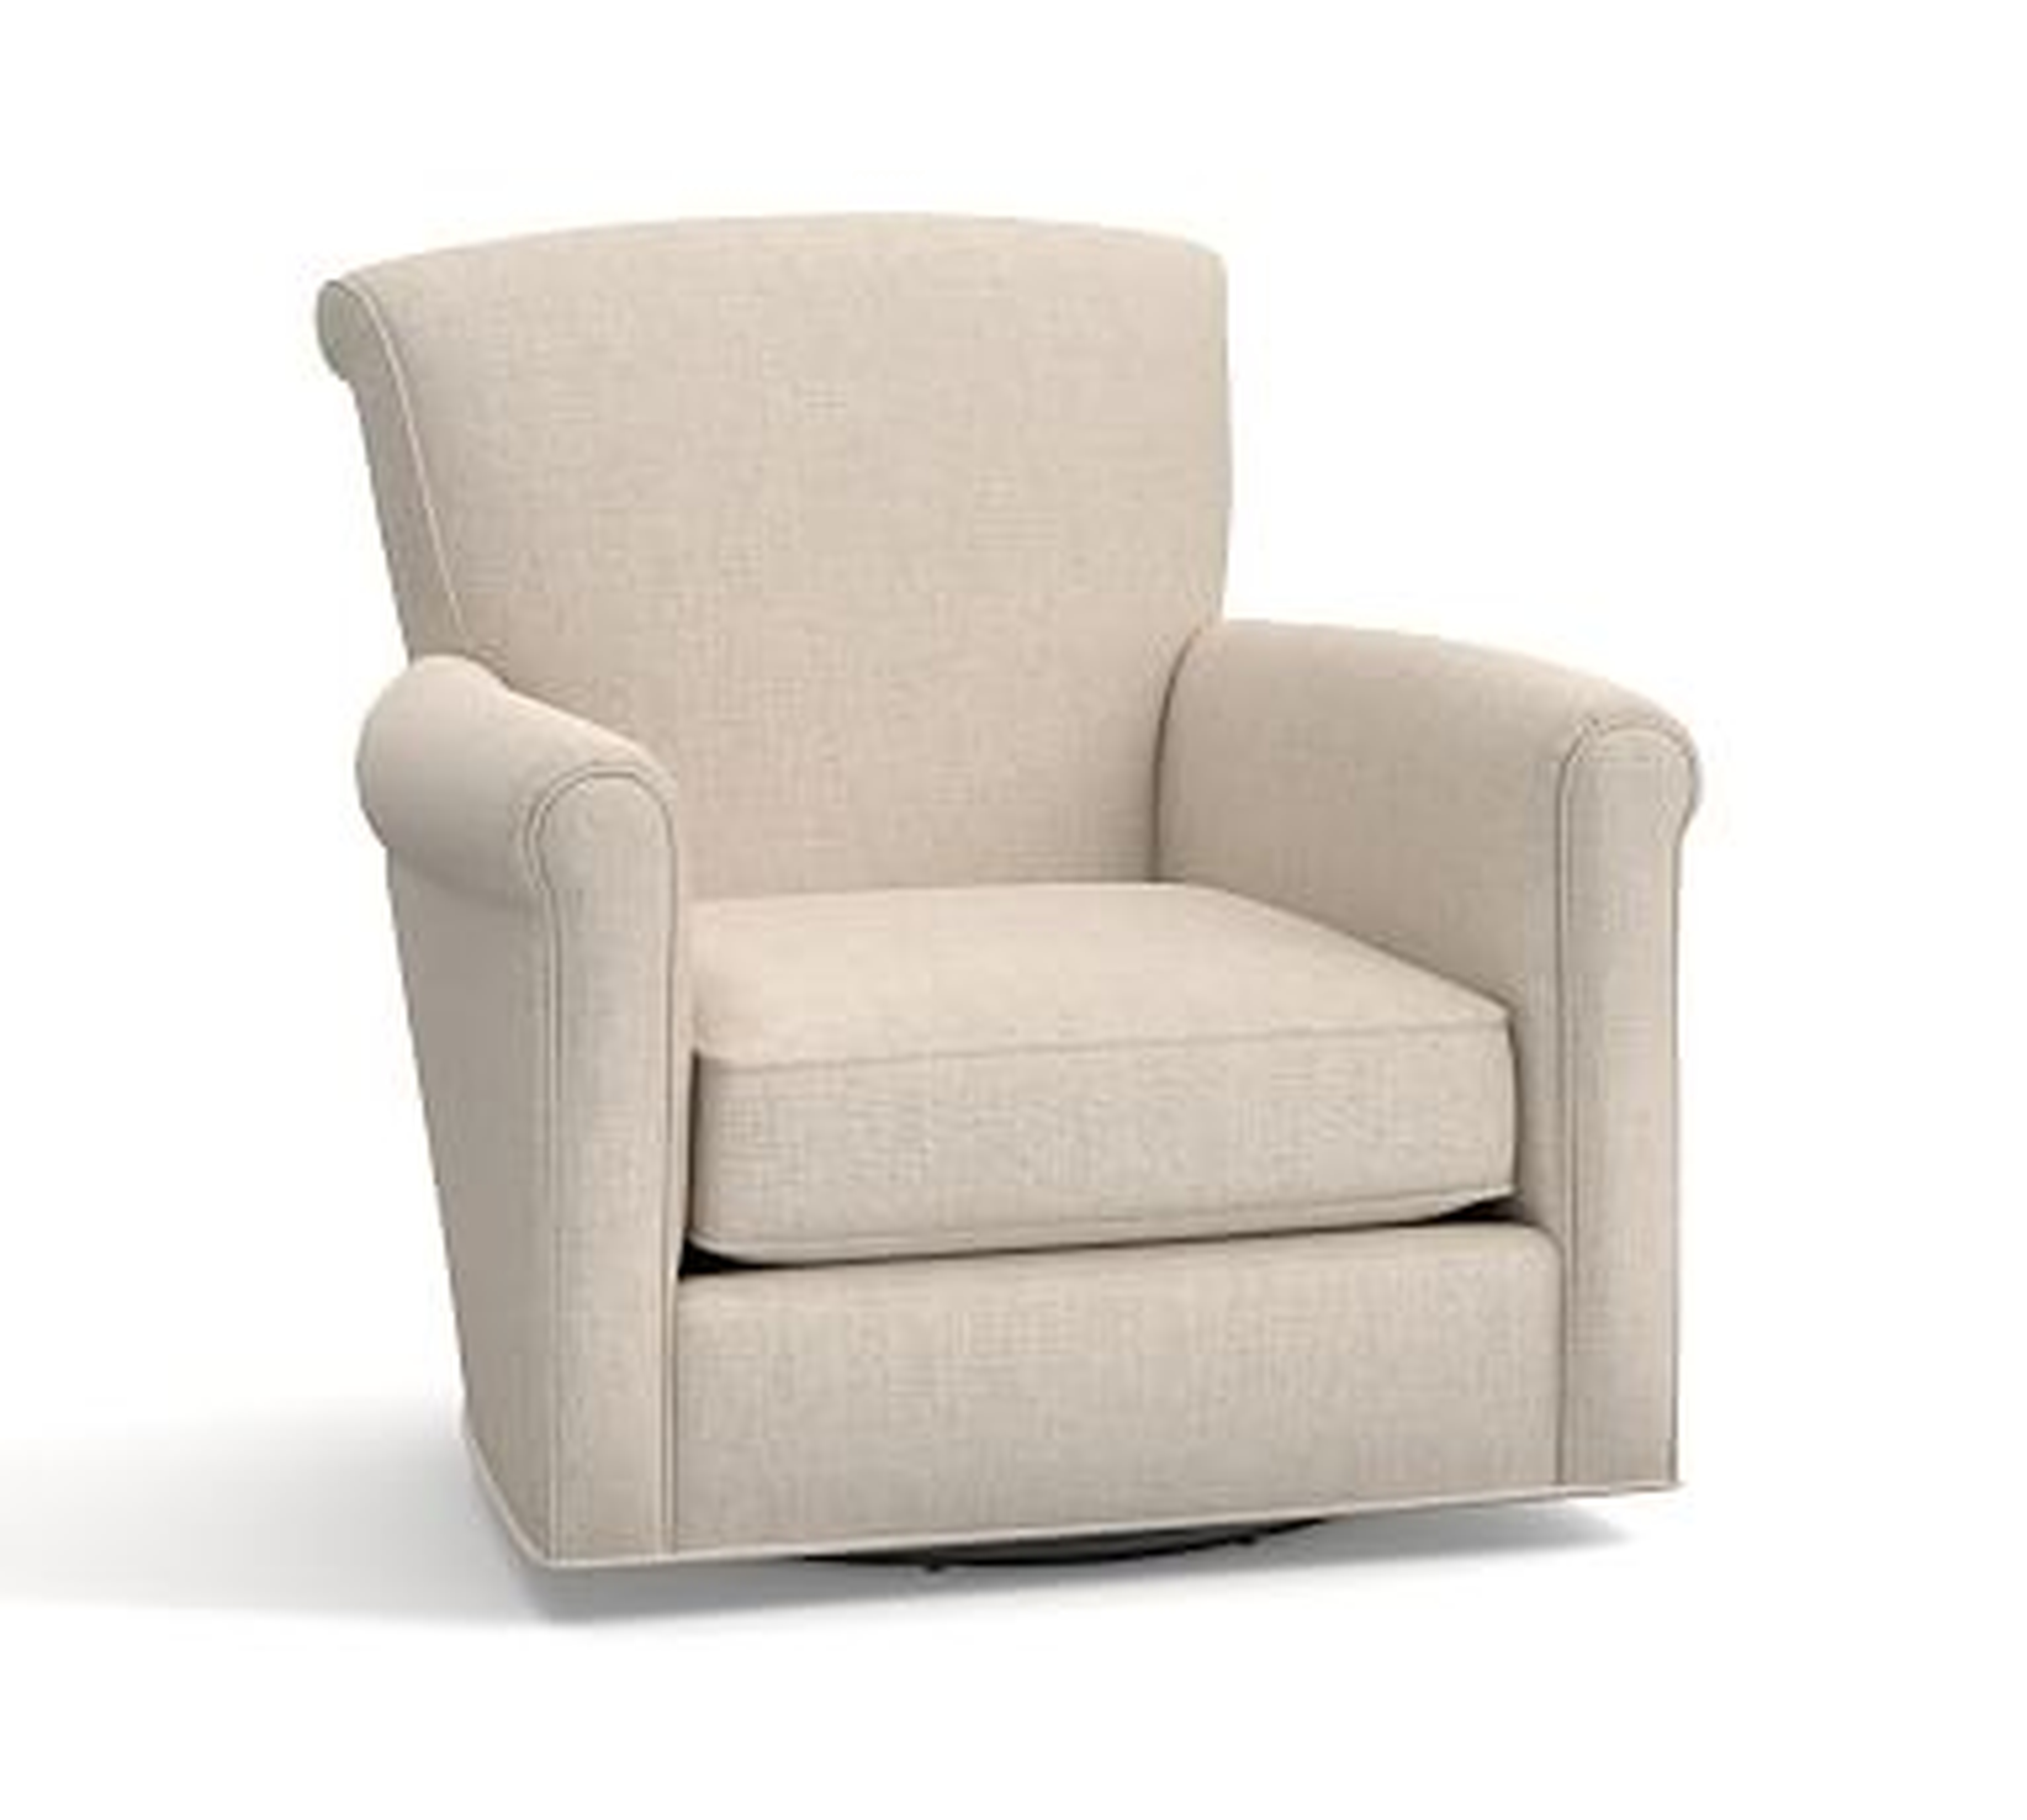 Irving Roll Arm Upholstered Swivel Armchair, Polyester Wrapped Cushions, Performance Everydaylinen(TM) Oatmeal - Pottery Barn